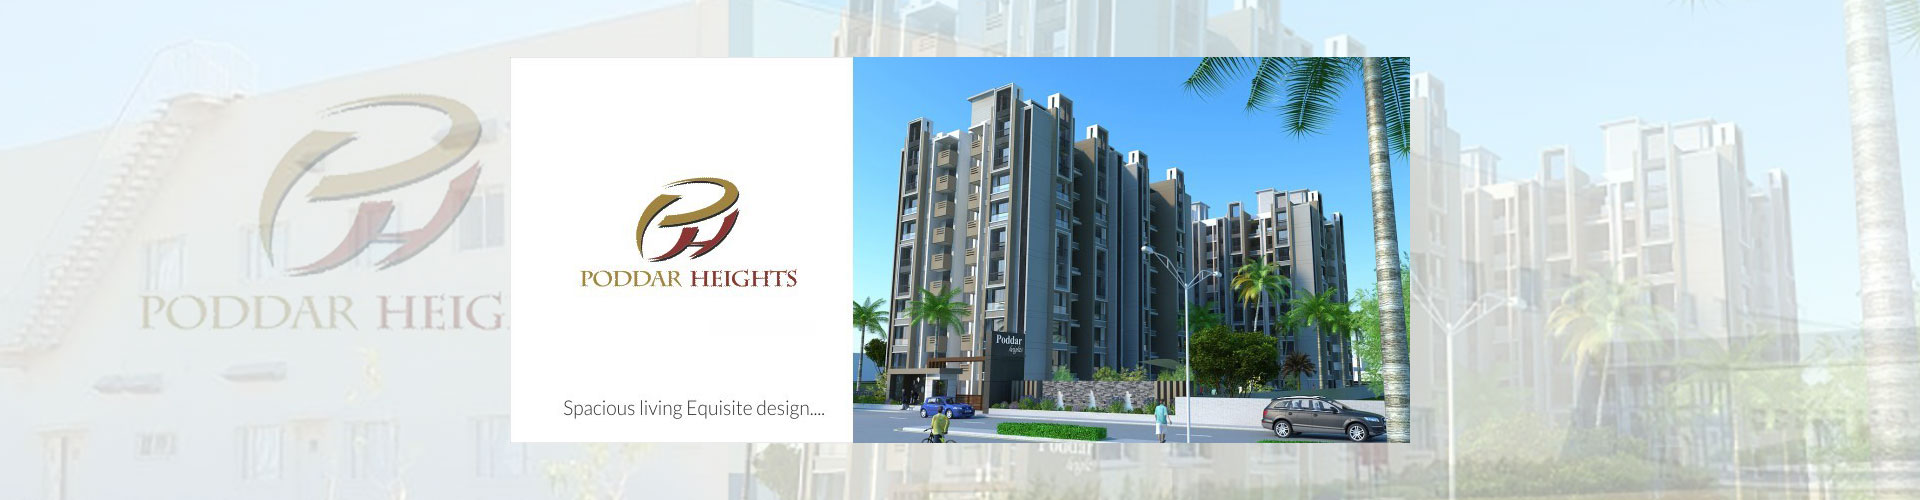 poddar heights - residential projects in ahmedabad